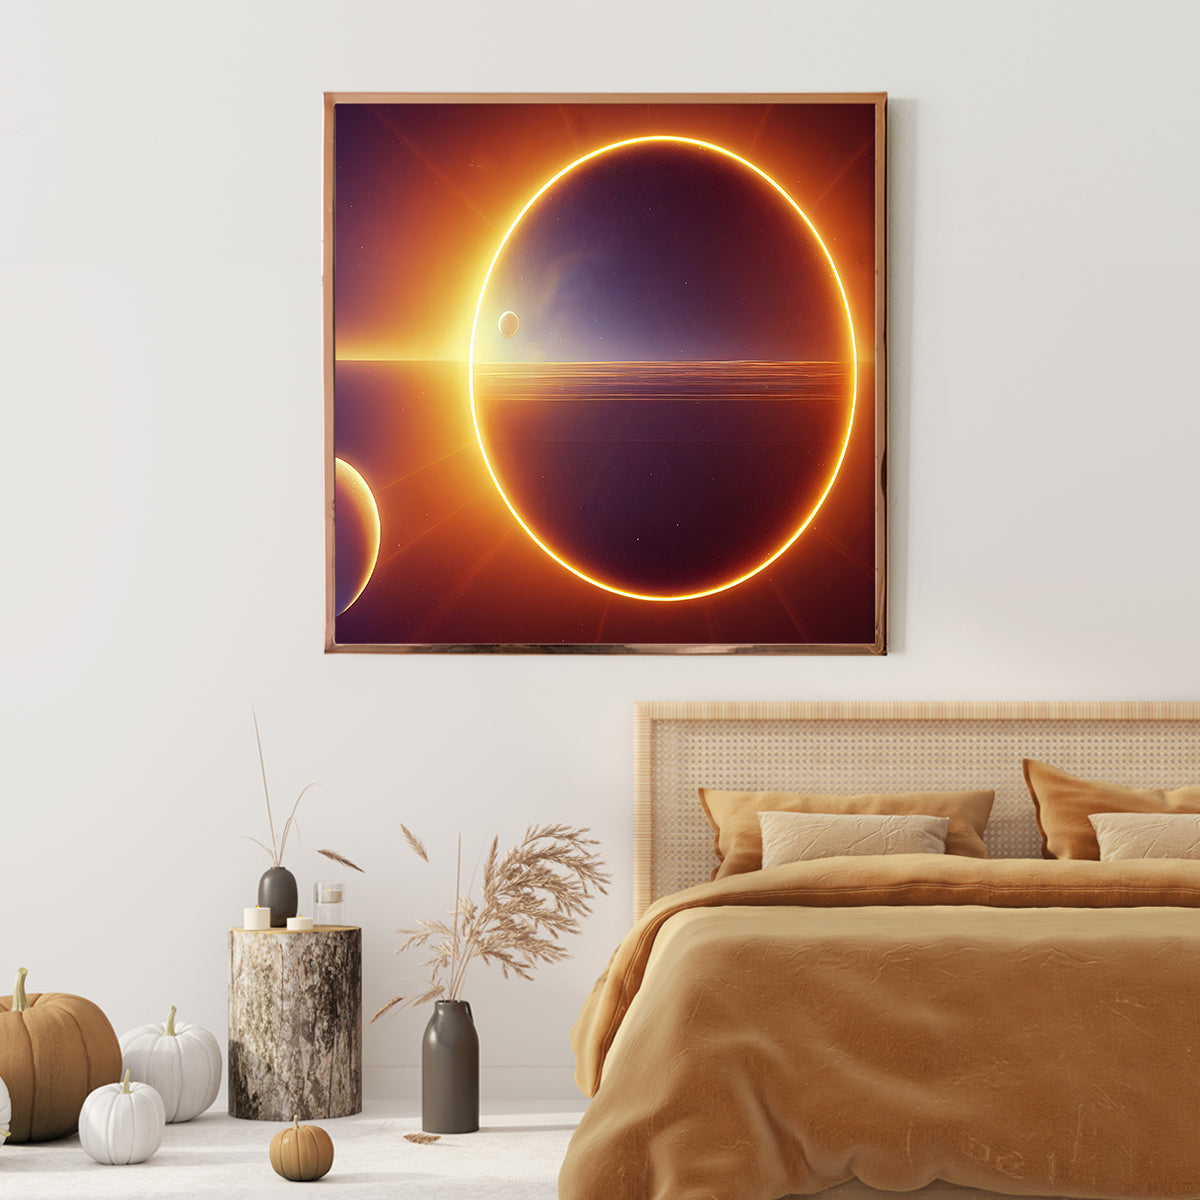 Sunshine in Space Posters And Wall Art Prints For Room-Square Posters NOT FRAMED-CetArt-8″x8″ inches-CetArt